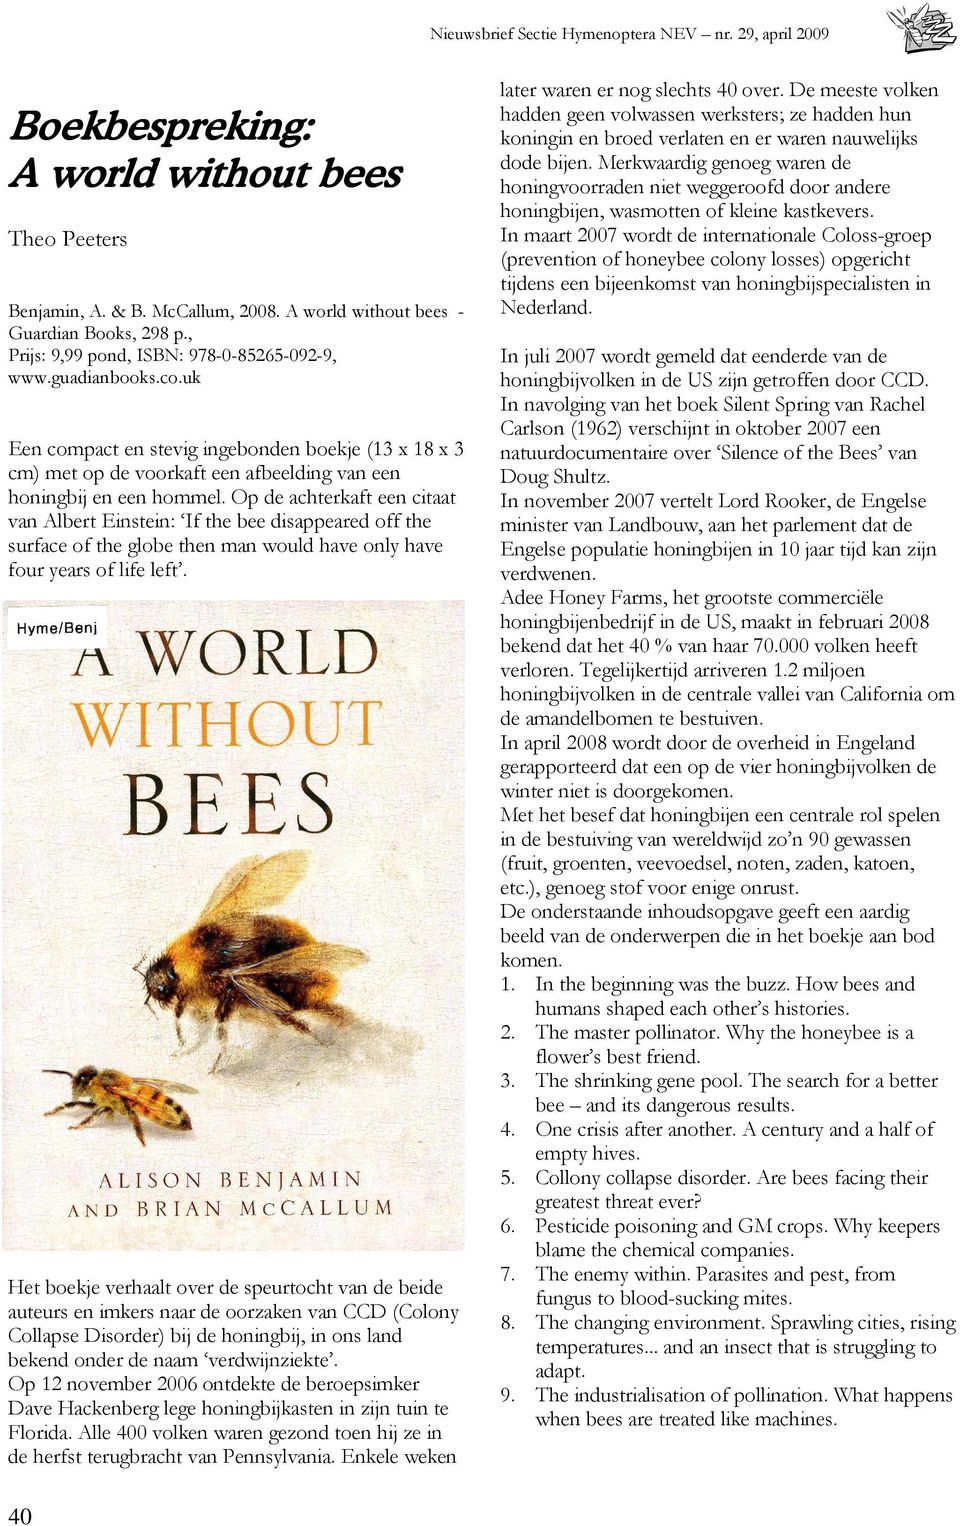 Op de achterkaft een citaat van Albert Einstein: If the bee disappeared off the surface of the globe then man would have only have four years of life left.